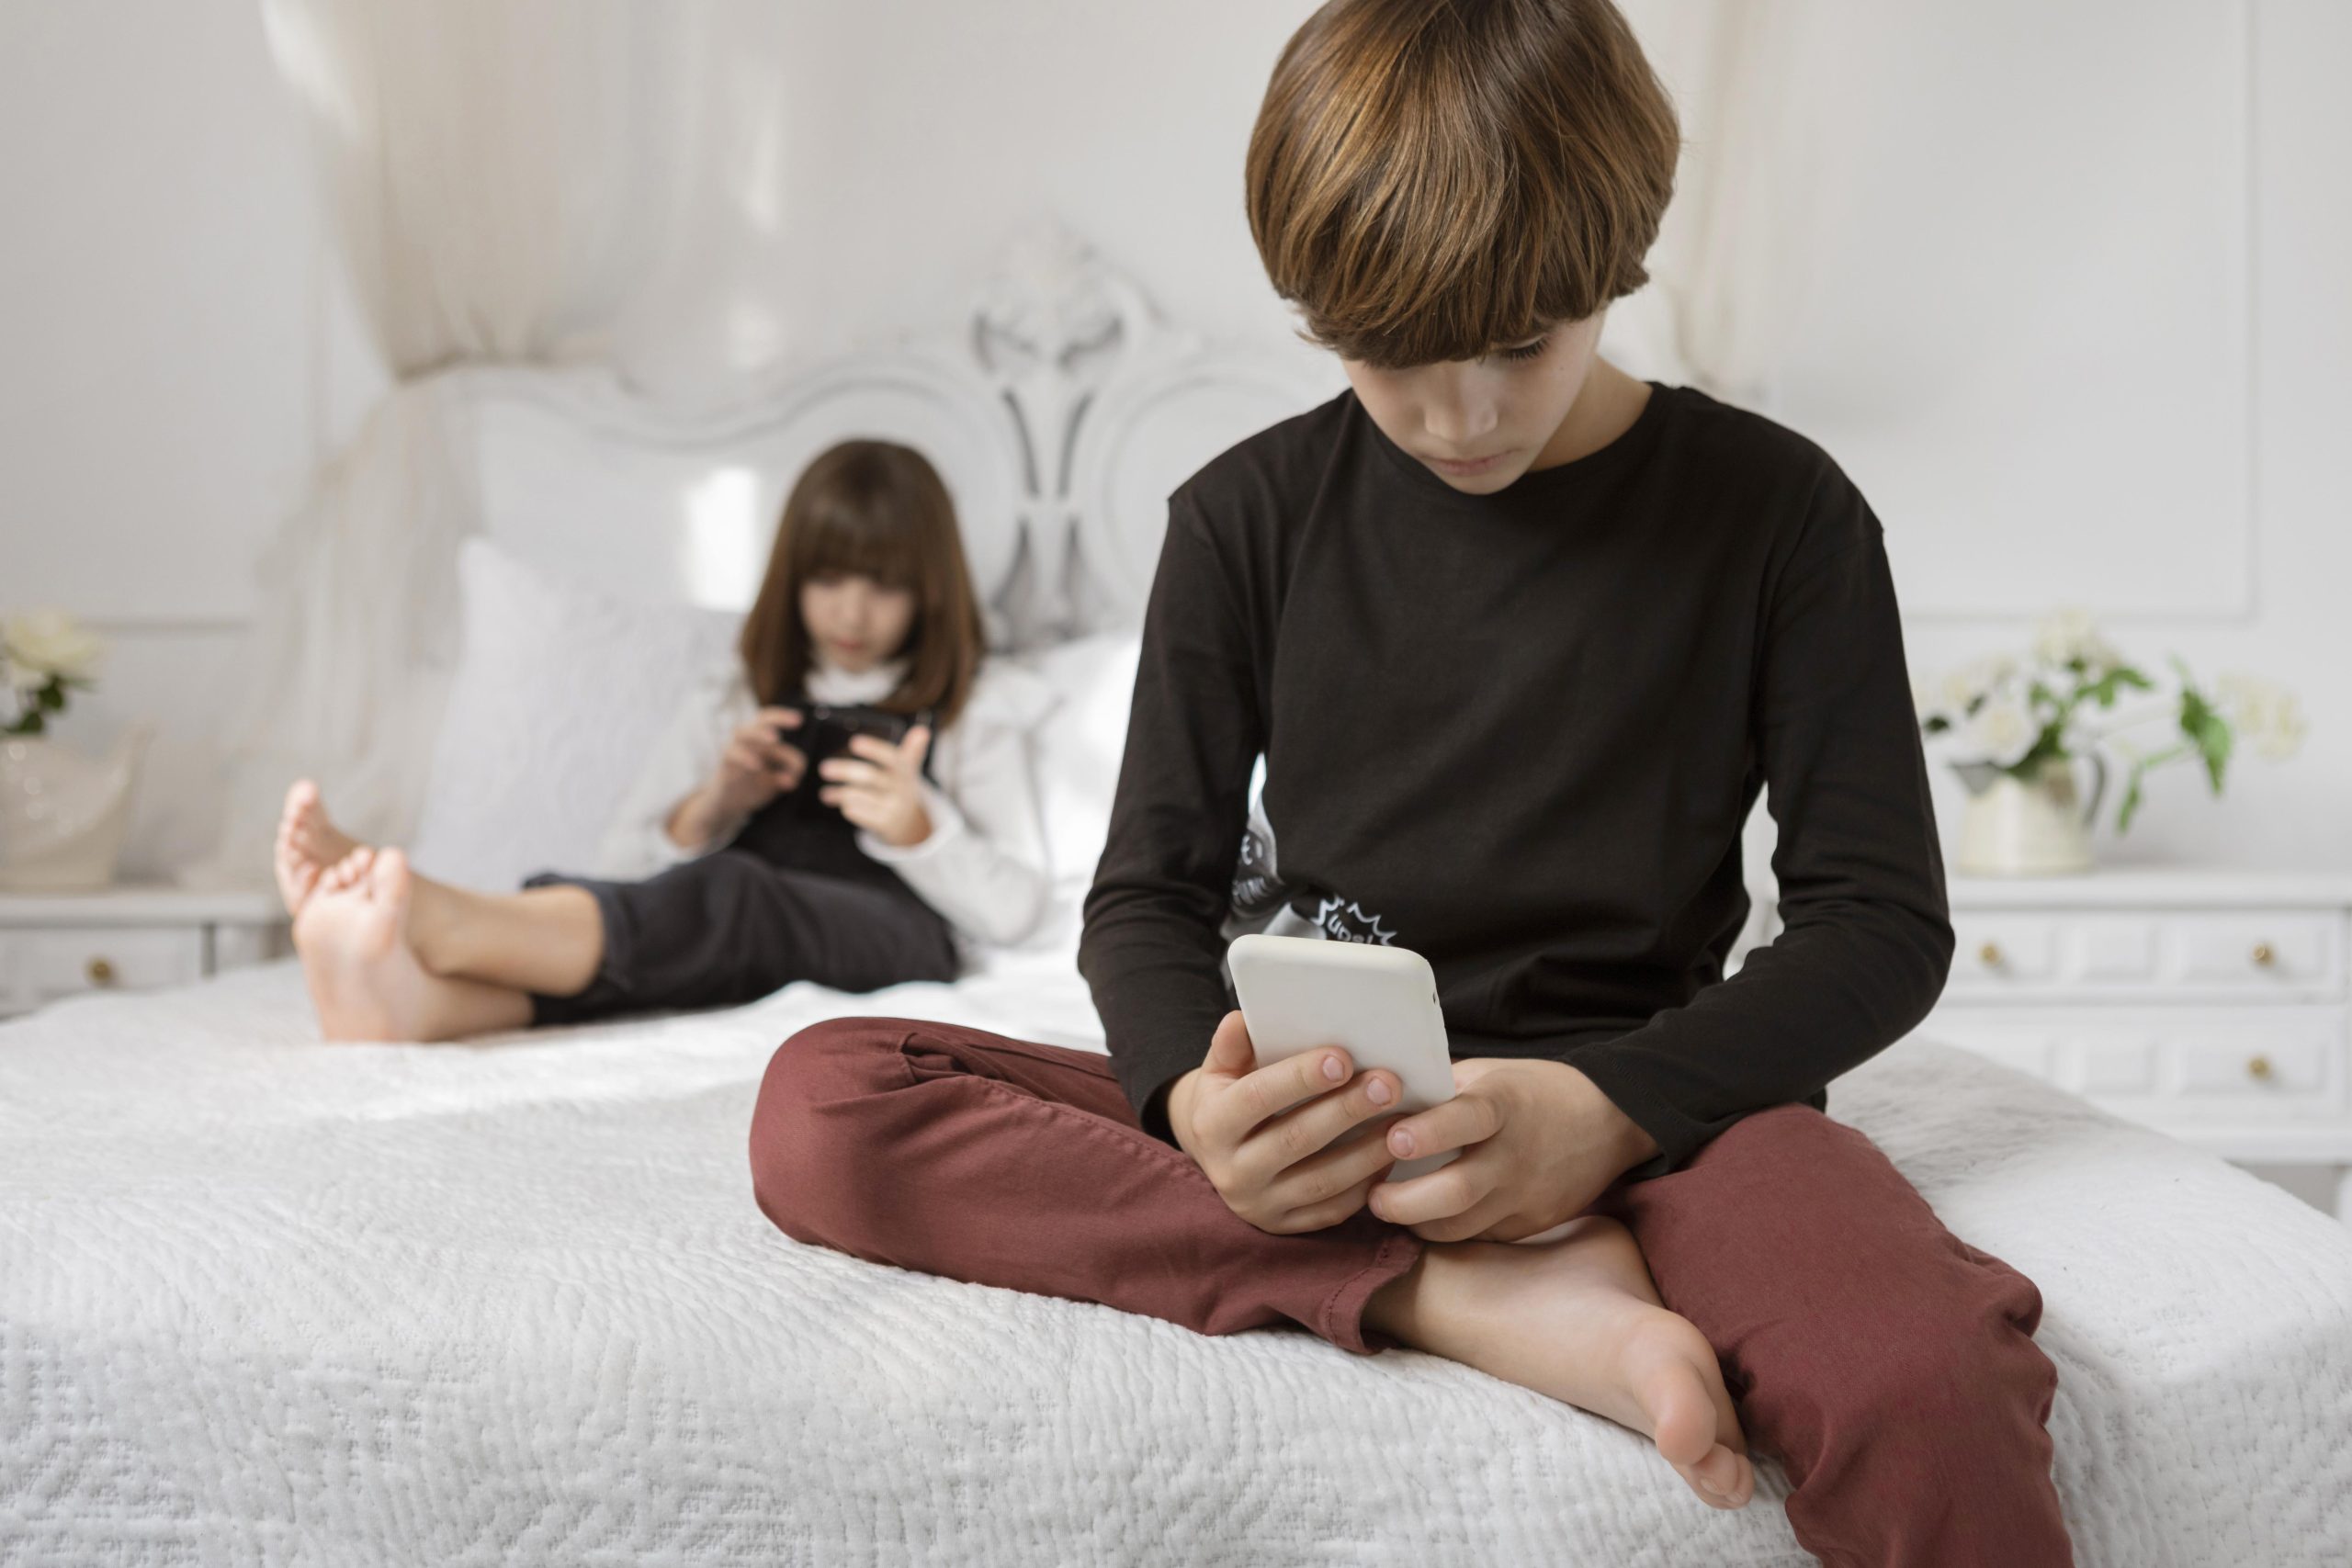 Understanding what parental control really means